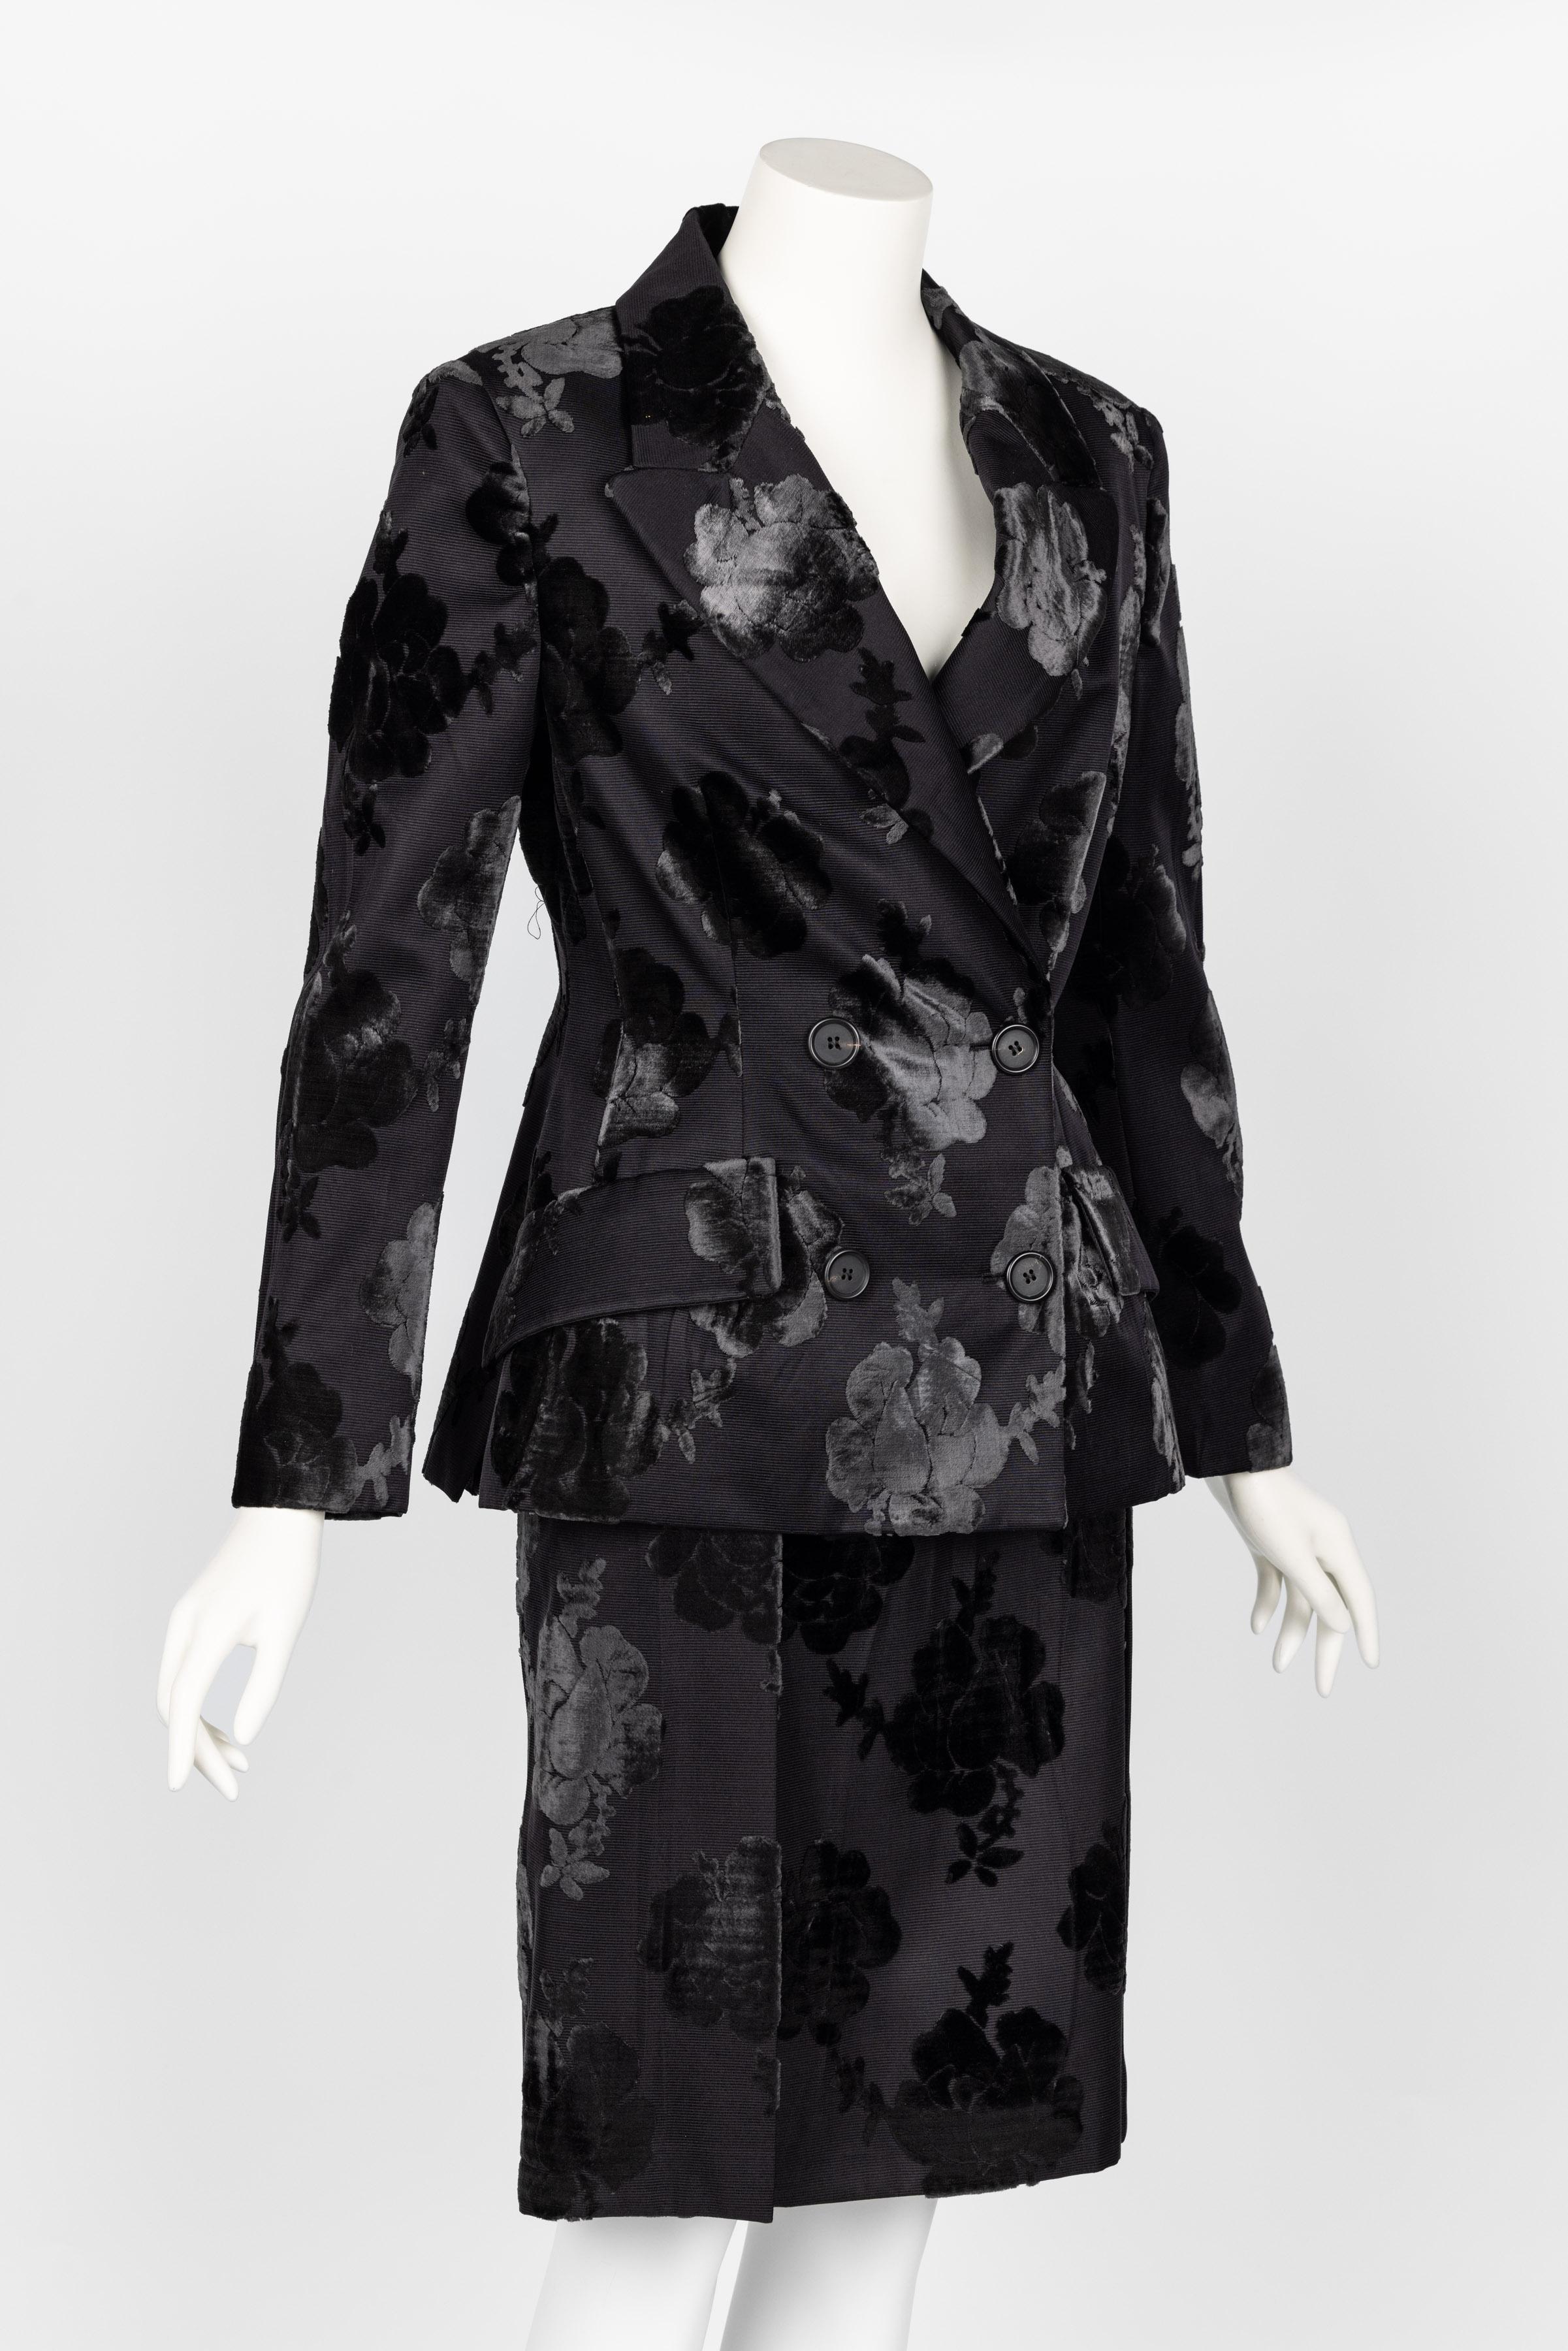 Prada F/W 2009 Runway Black Silk Velvet Floral Skirt Suit New W/Tags In New Condition For Sale In Boca Raton, FL